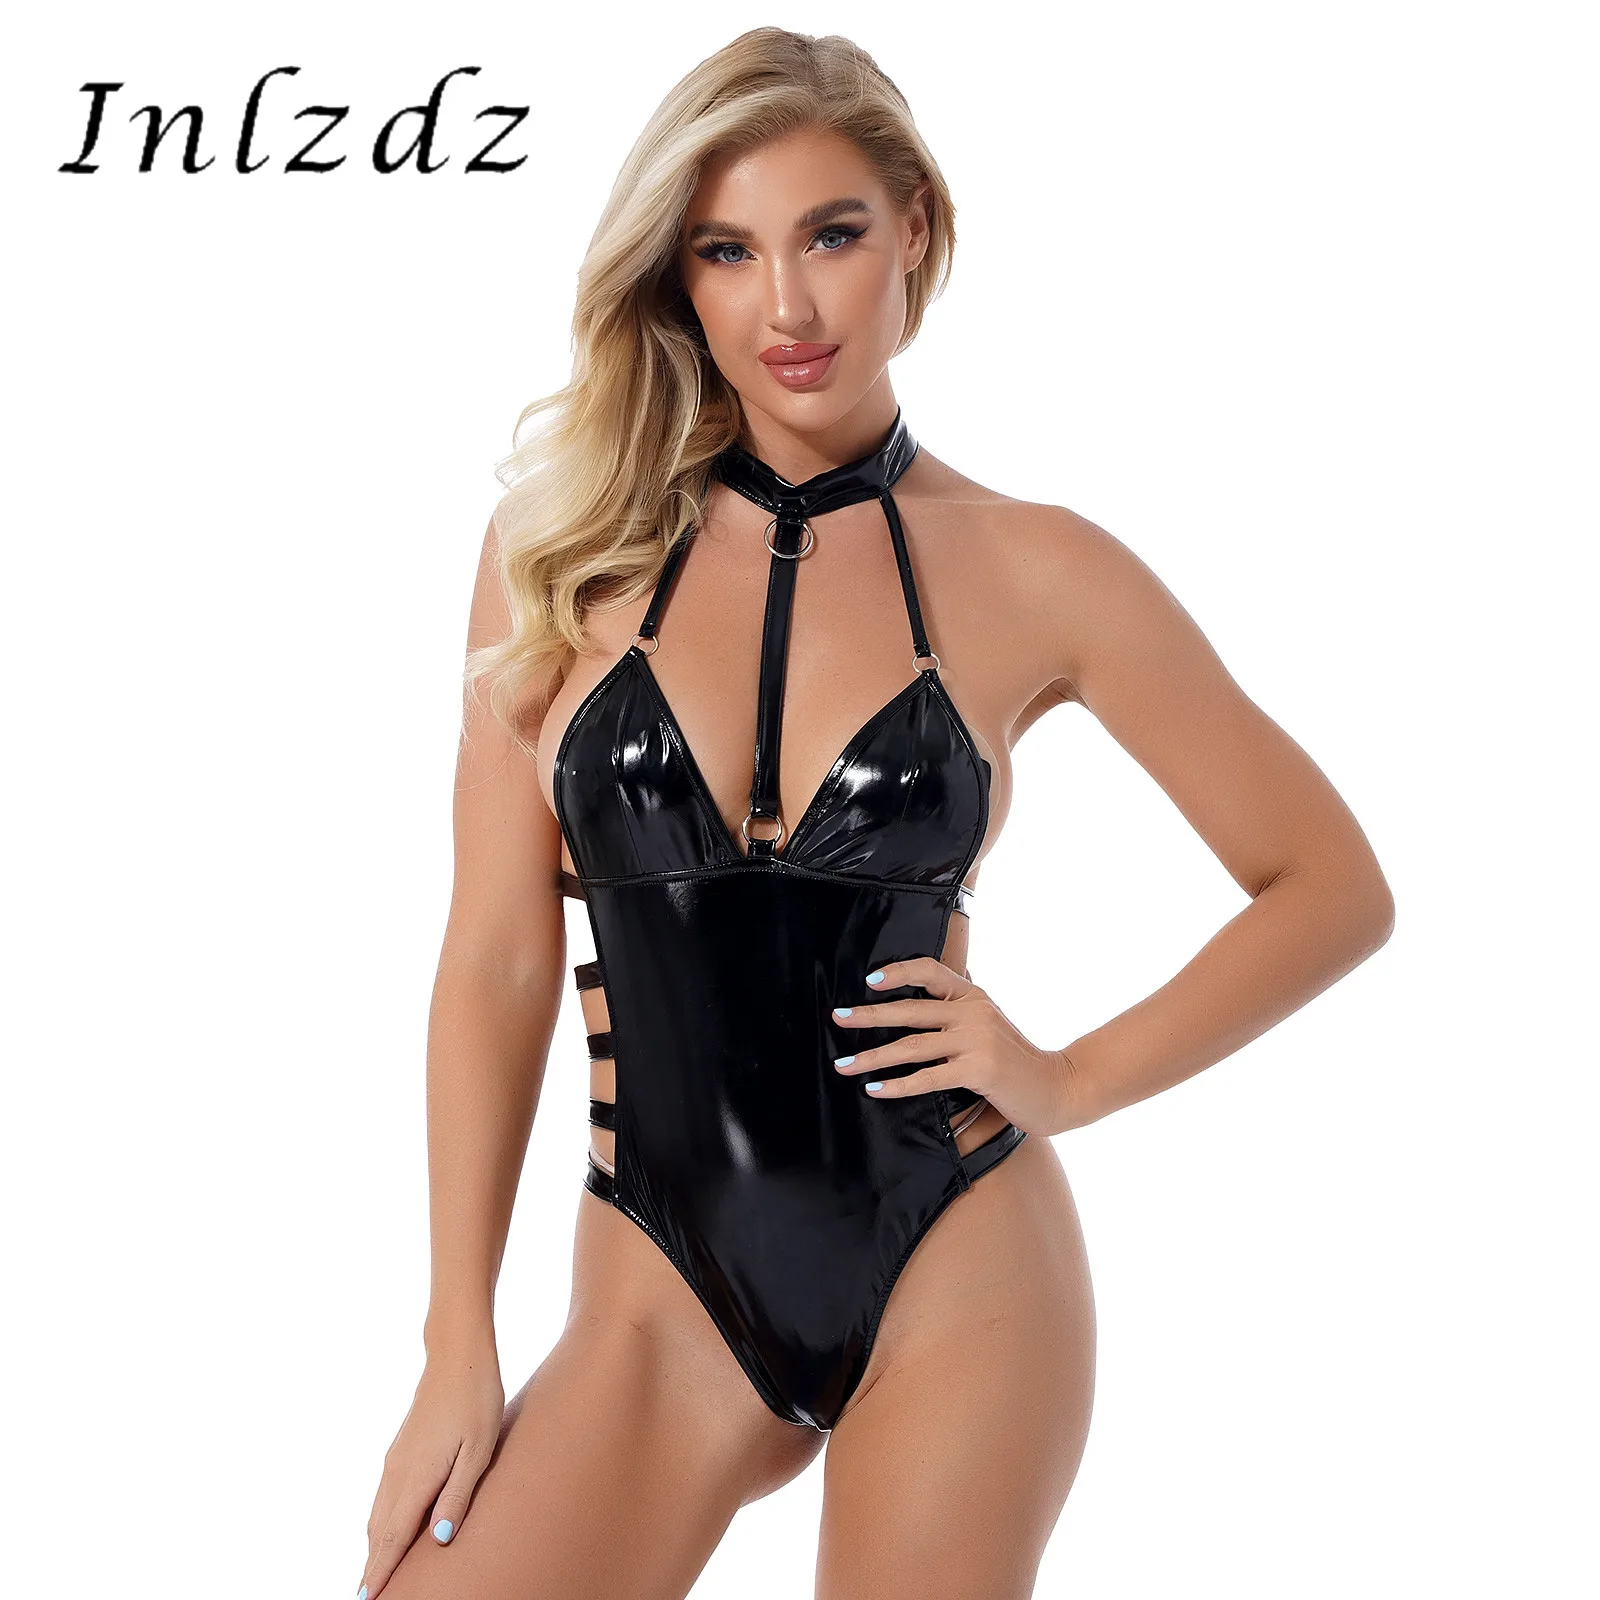 

Womens Lingerie Halter Cutout Catsuit Clubwear Hollow Out Wet Look Patent Leather Bodysuit Backless Sleeveless Leotard Costume